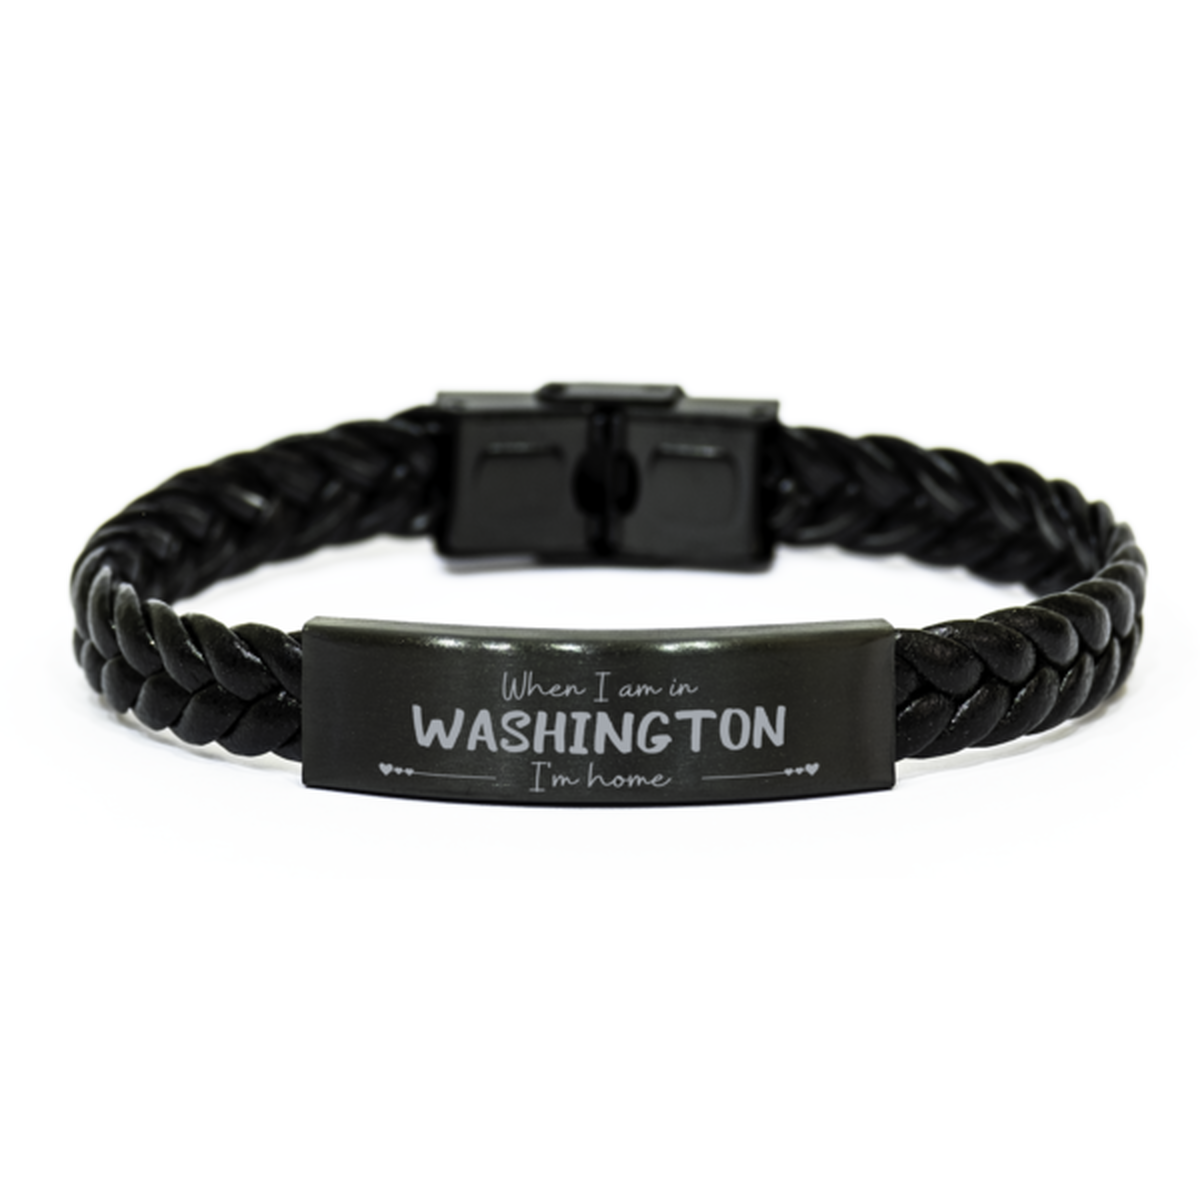 When I am in Washington I'm home Braided Leather Bracelet, Cheap Gifts For Washington, State Washington Birthday Gifts for Friends Coworker